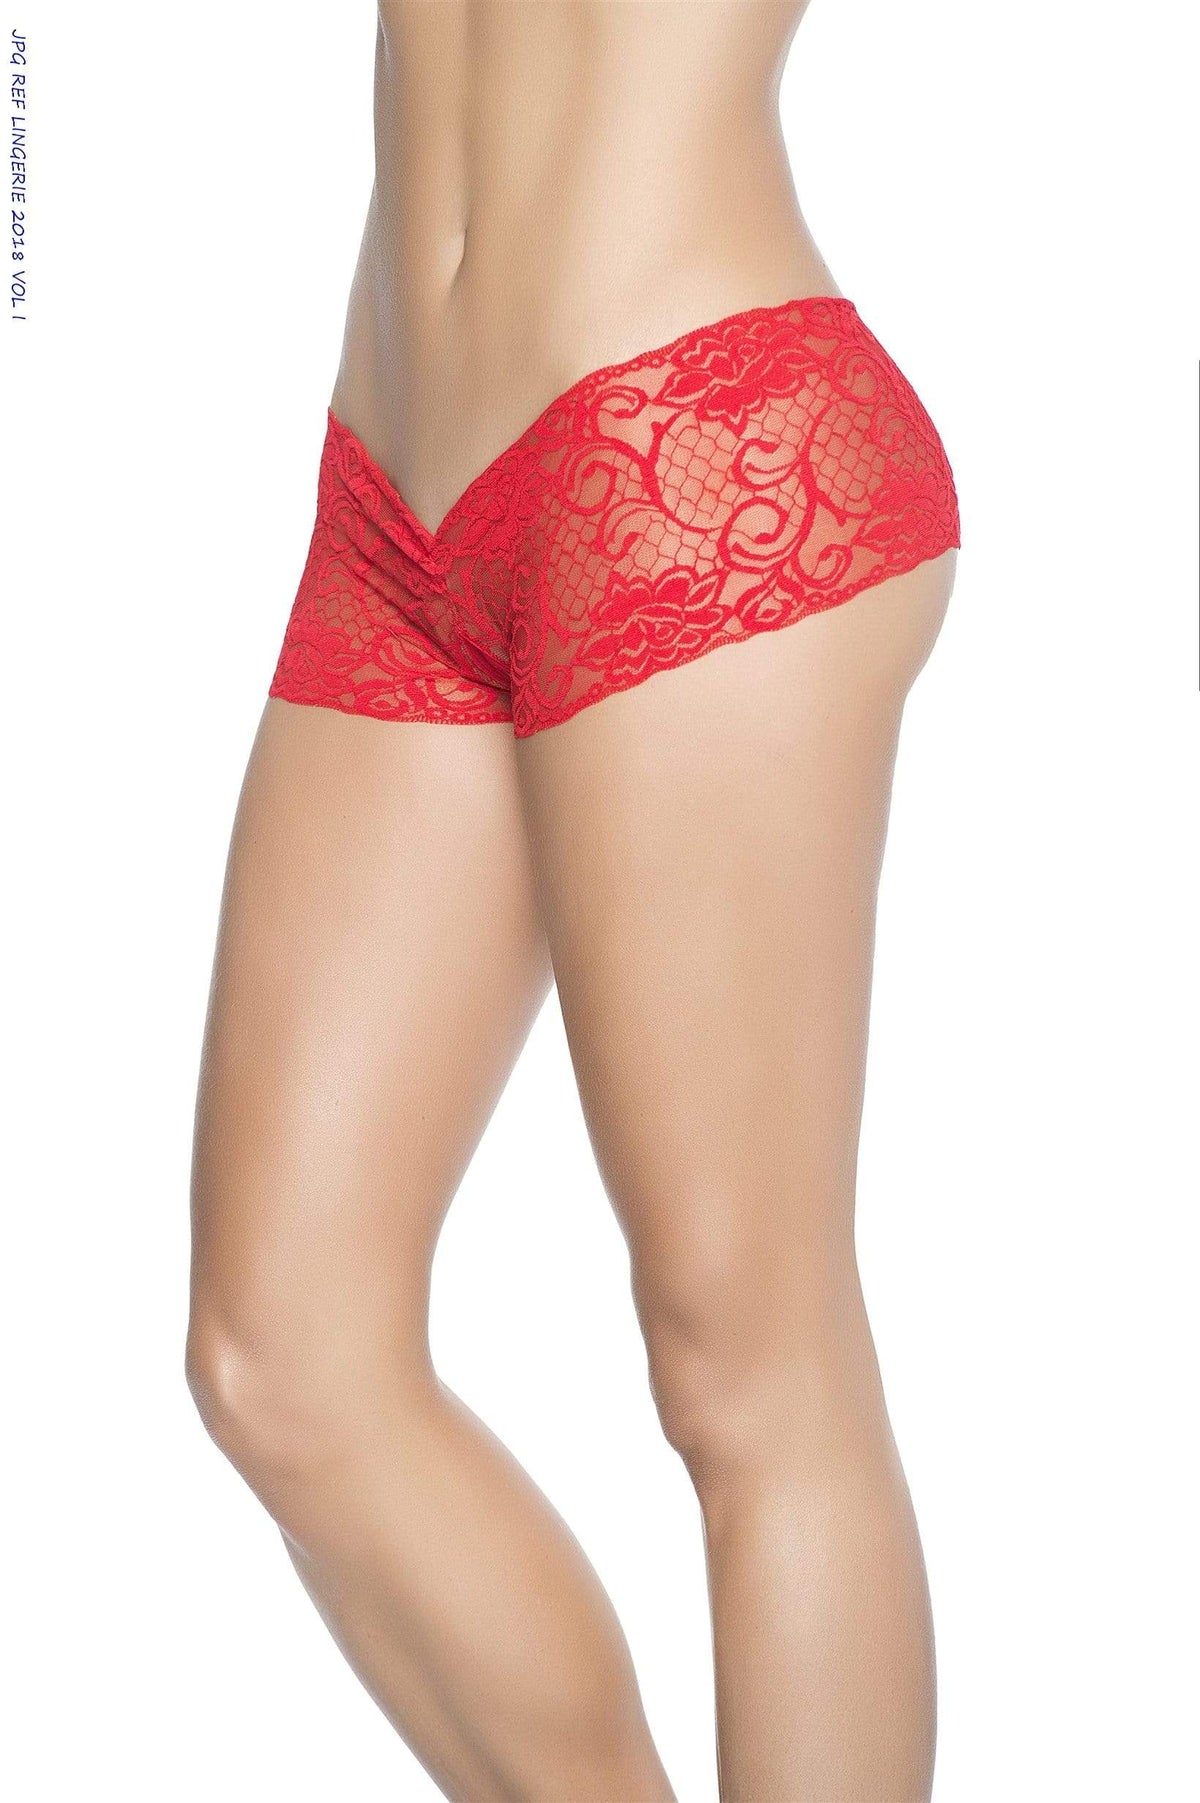 mapale Red / EXTRA LARGE Turquoise Peek-a-Boo Crotchless Boyshort Panty Lingerie (Many Colors Available) SHS-98-RED-XL-MA-3 Turquoise Peek-a-Boo Crotchless Boyshort Panty Lingerie (Many Colors Available) Apparel &amp; Accessories &gt; Clothing &gt; Underwear &amp; Socks &gt; Underwear